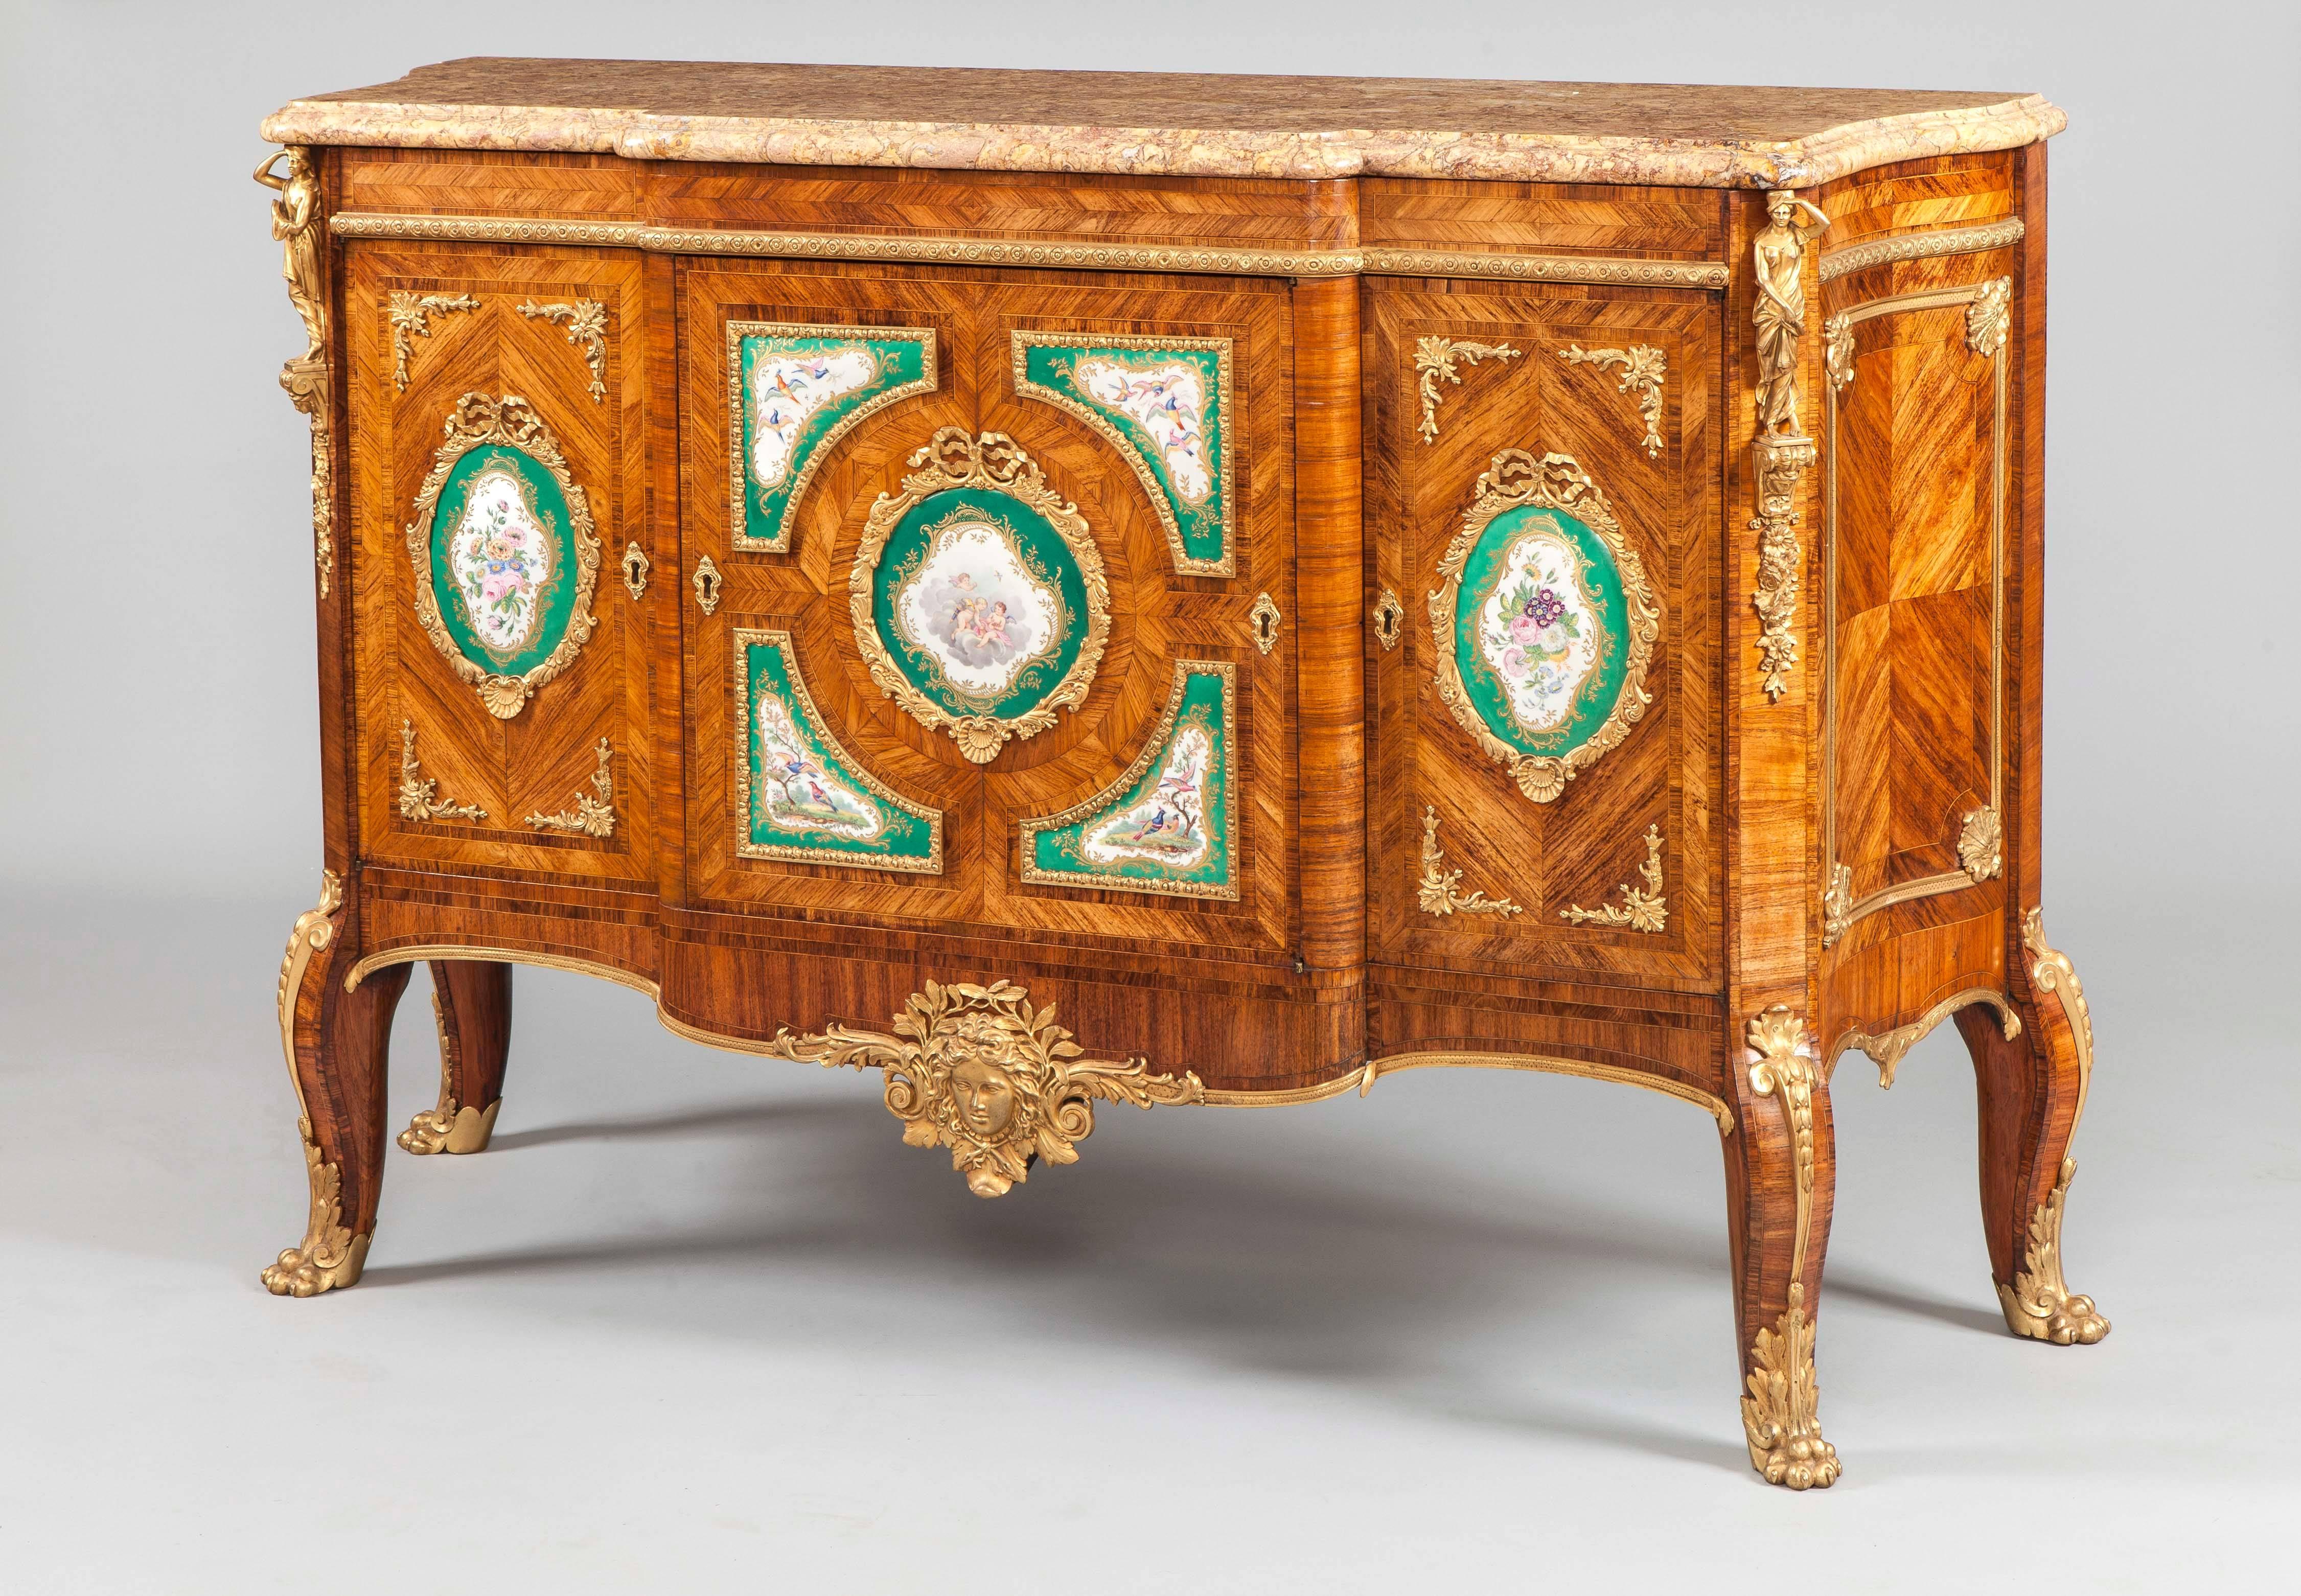 French Provincial Pair of 19th Century Commodes of Kingwood, Green Porcelain Plaques and Marble